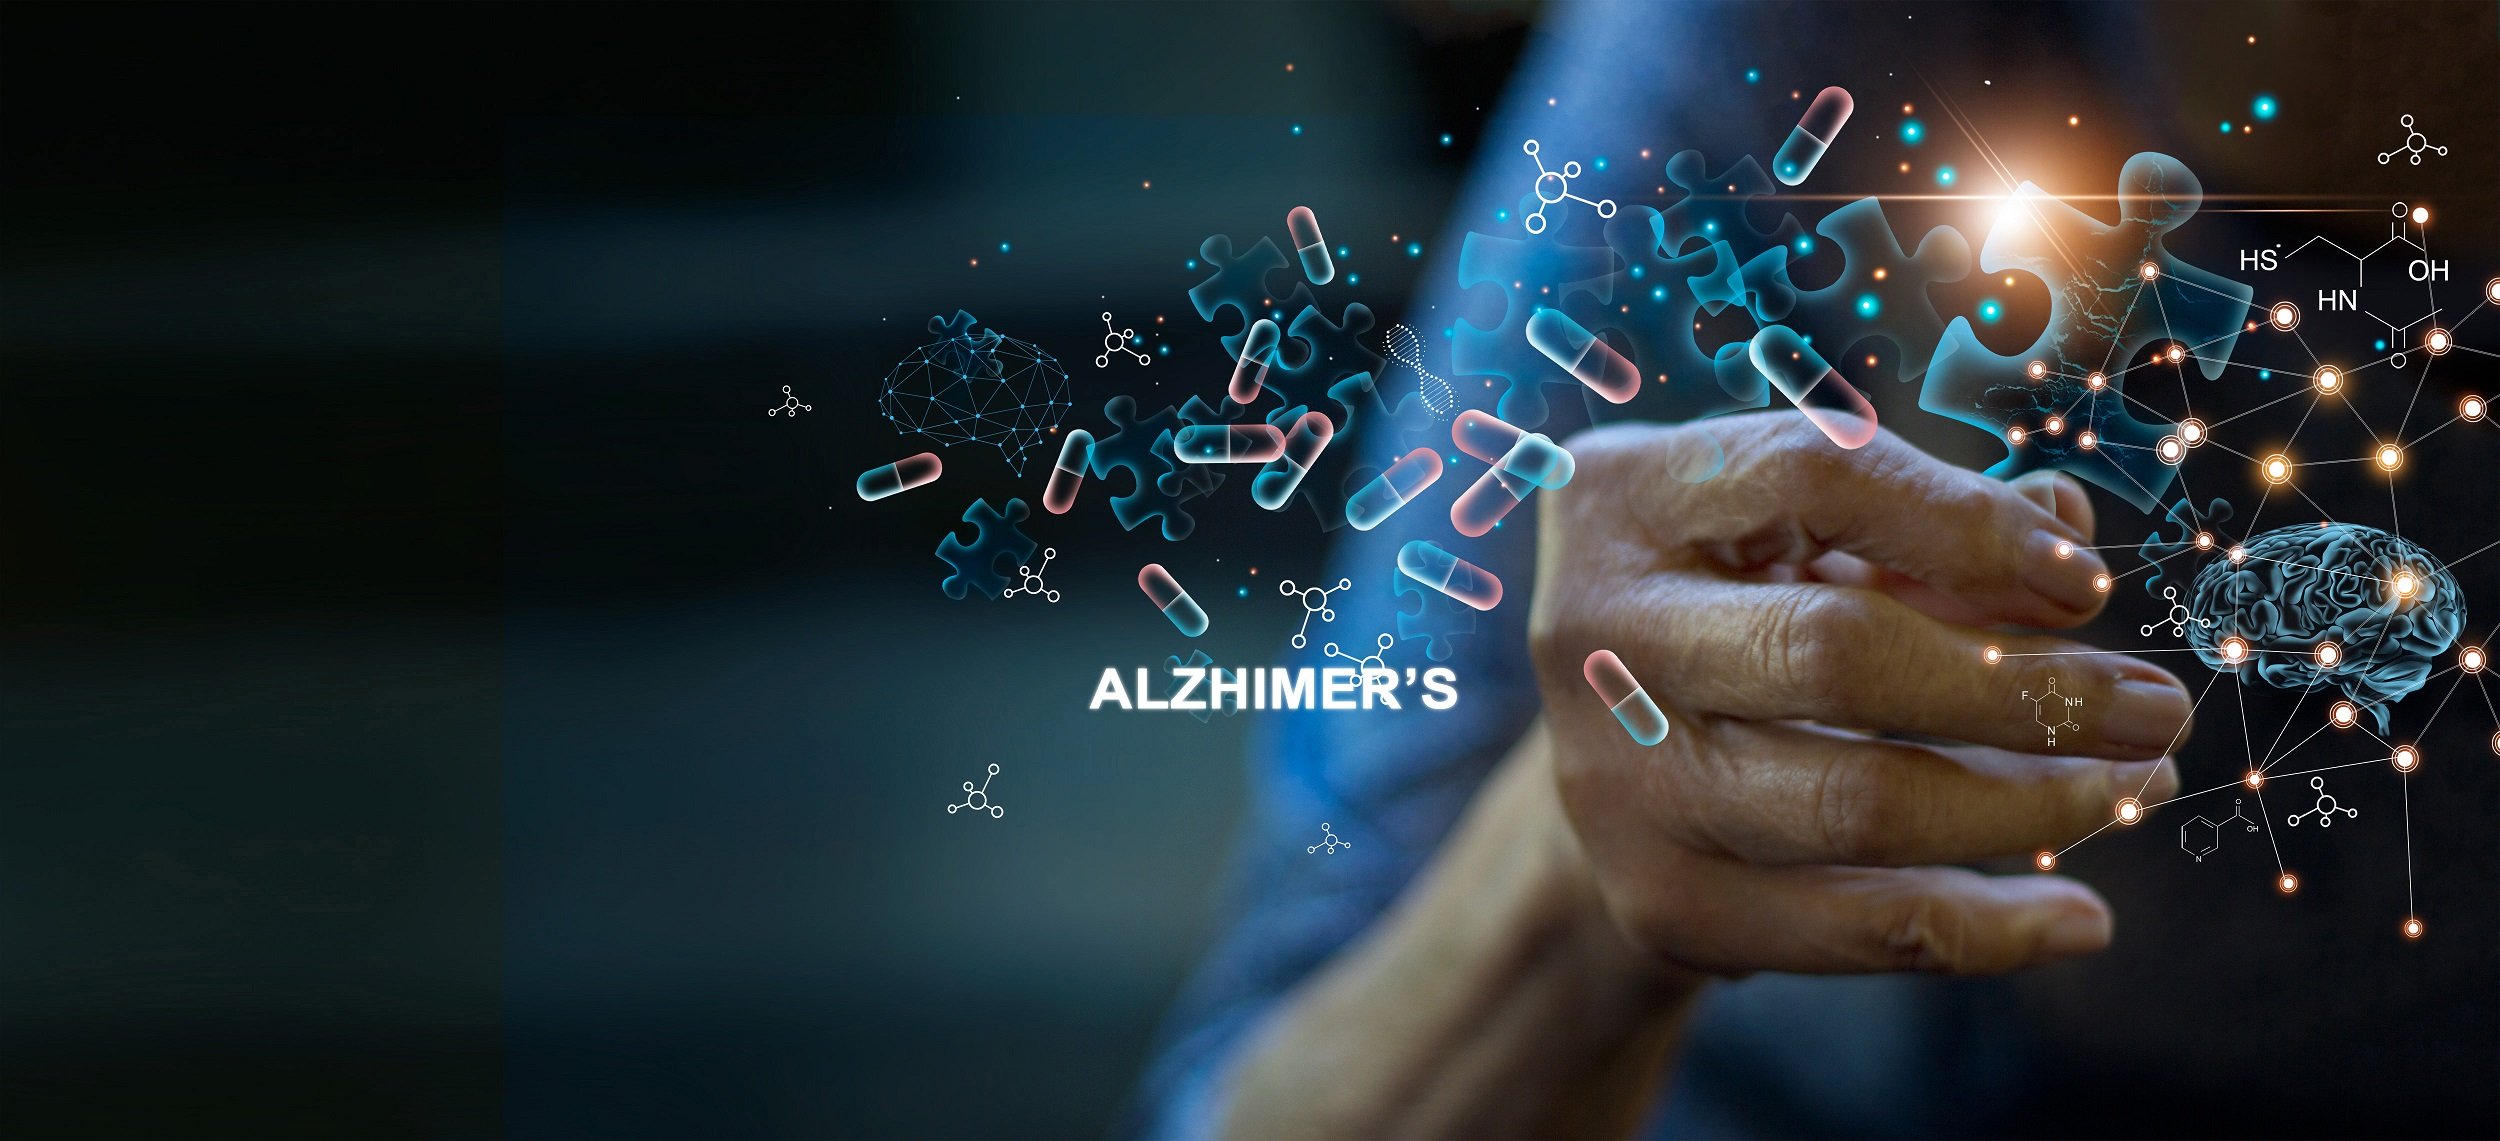 latest research on Alzheimer's treatment